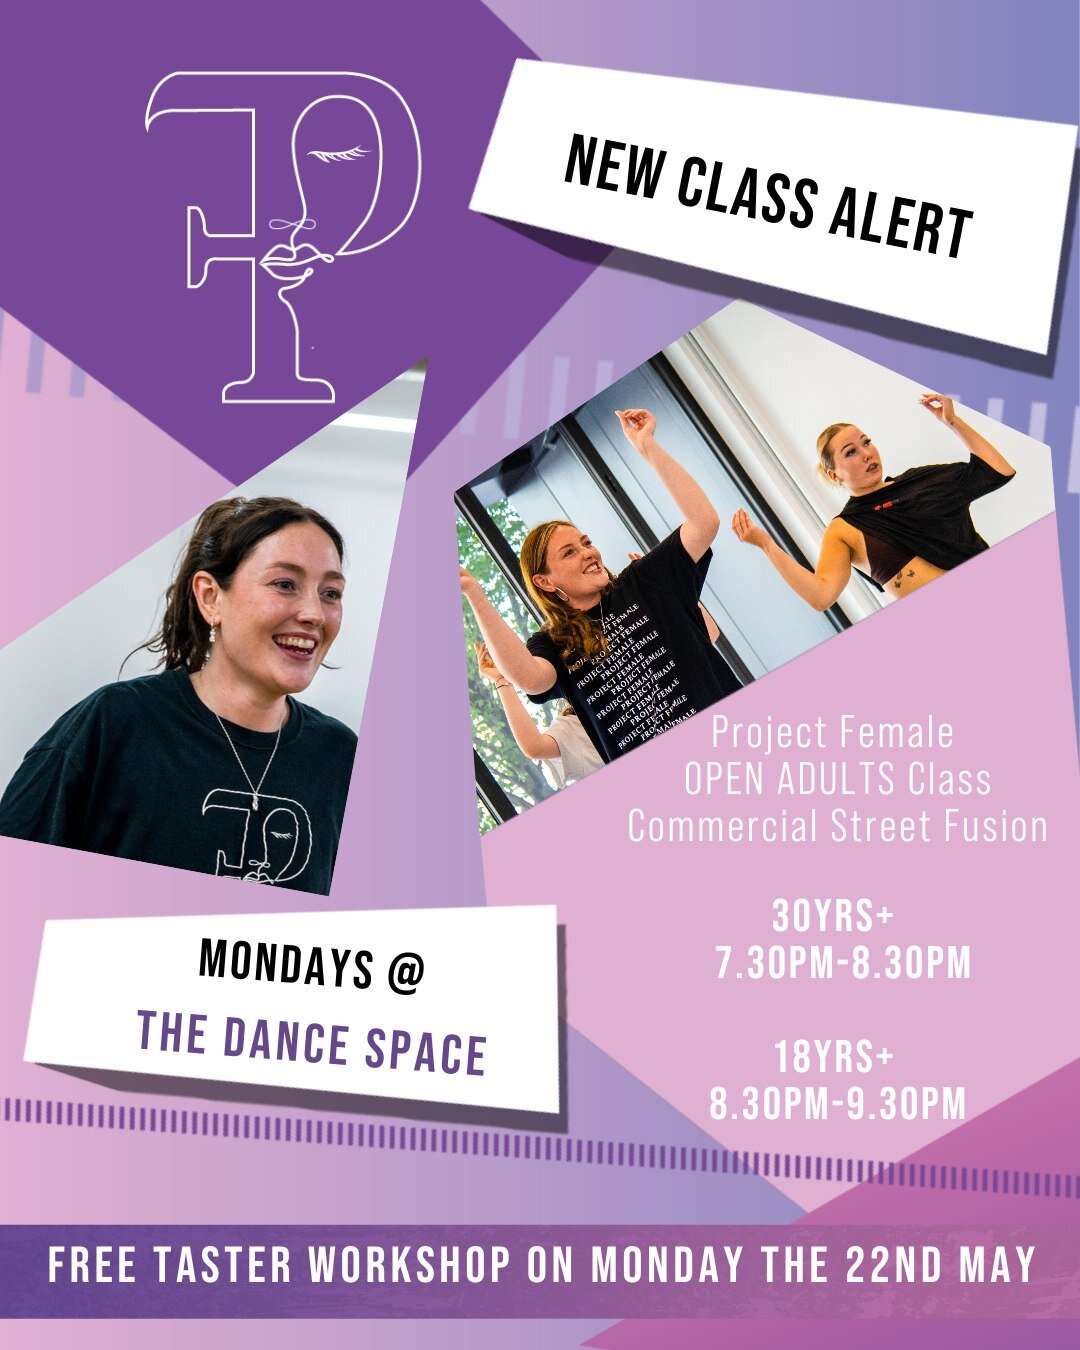 📢NEW ADULT CLASS ALERT📢

Come and Join our community of Fiercely Empowered Females expressing themselves unapologetically though dance. ✨

Our adult classes will teach routines using the unique Project Female fusion of dance genres including street